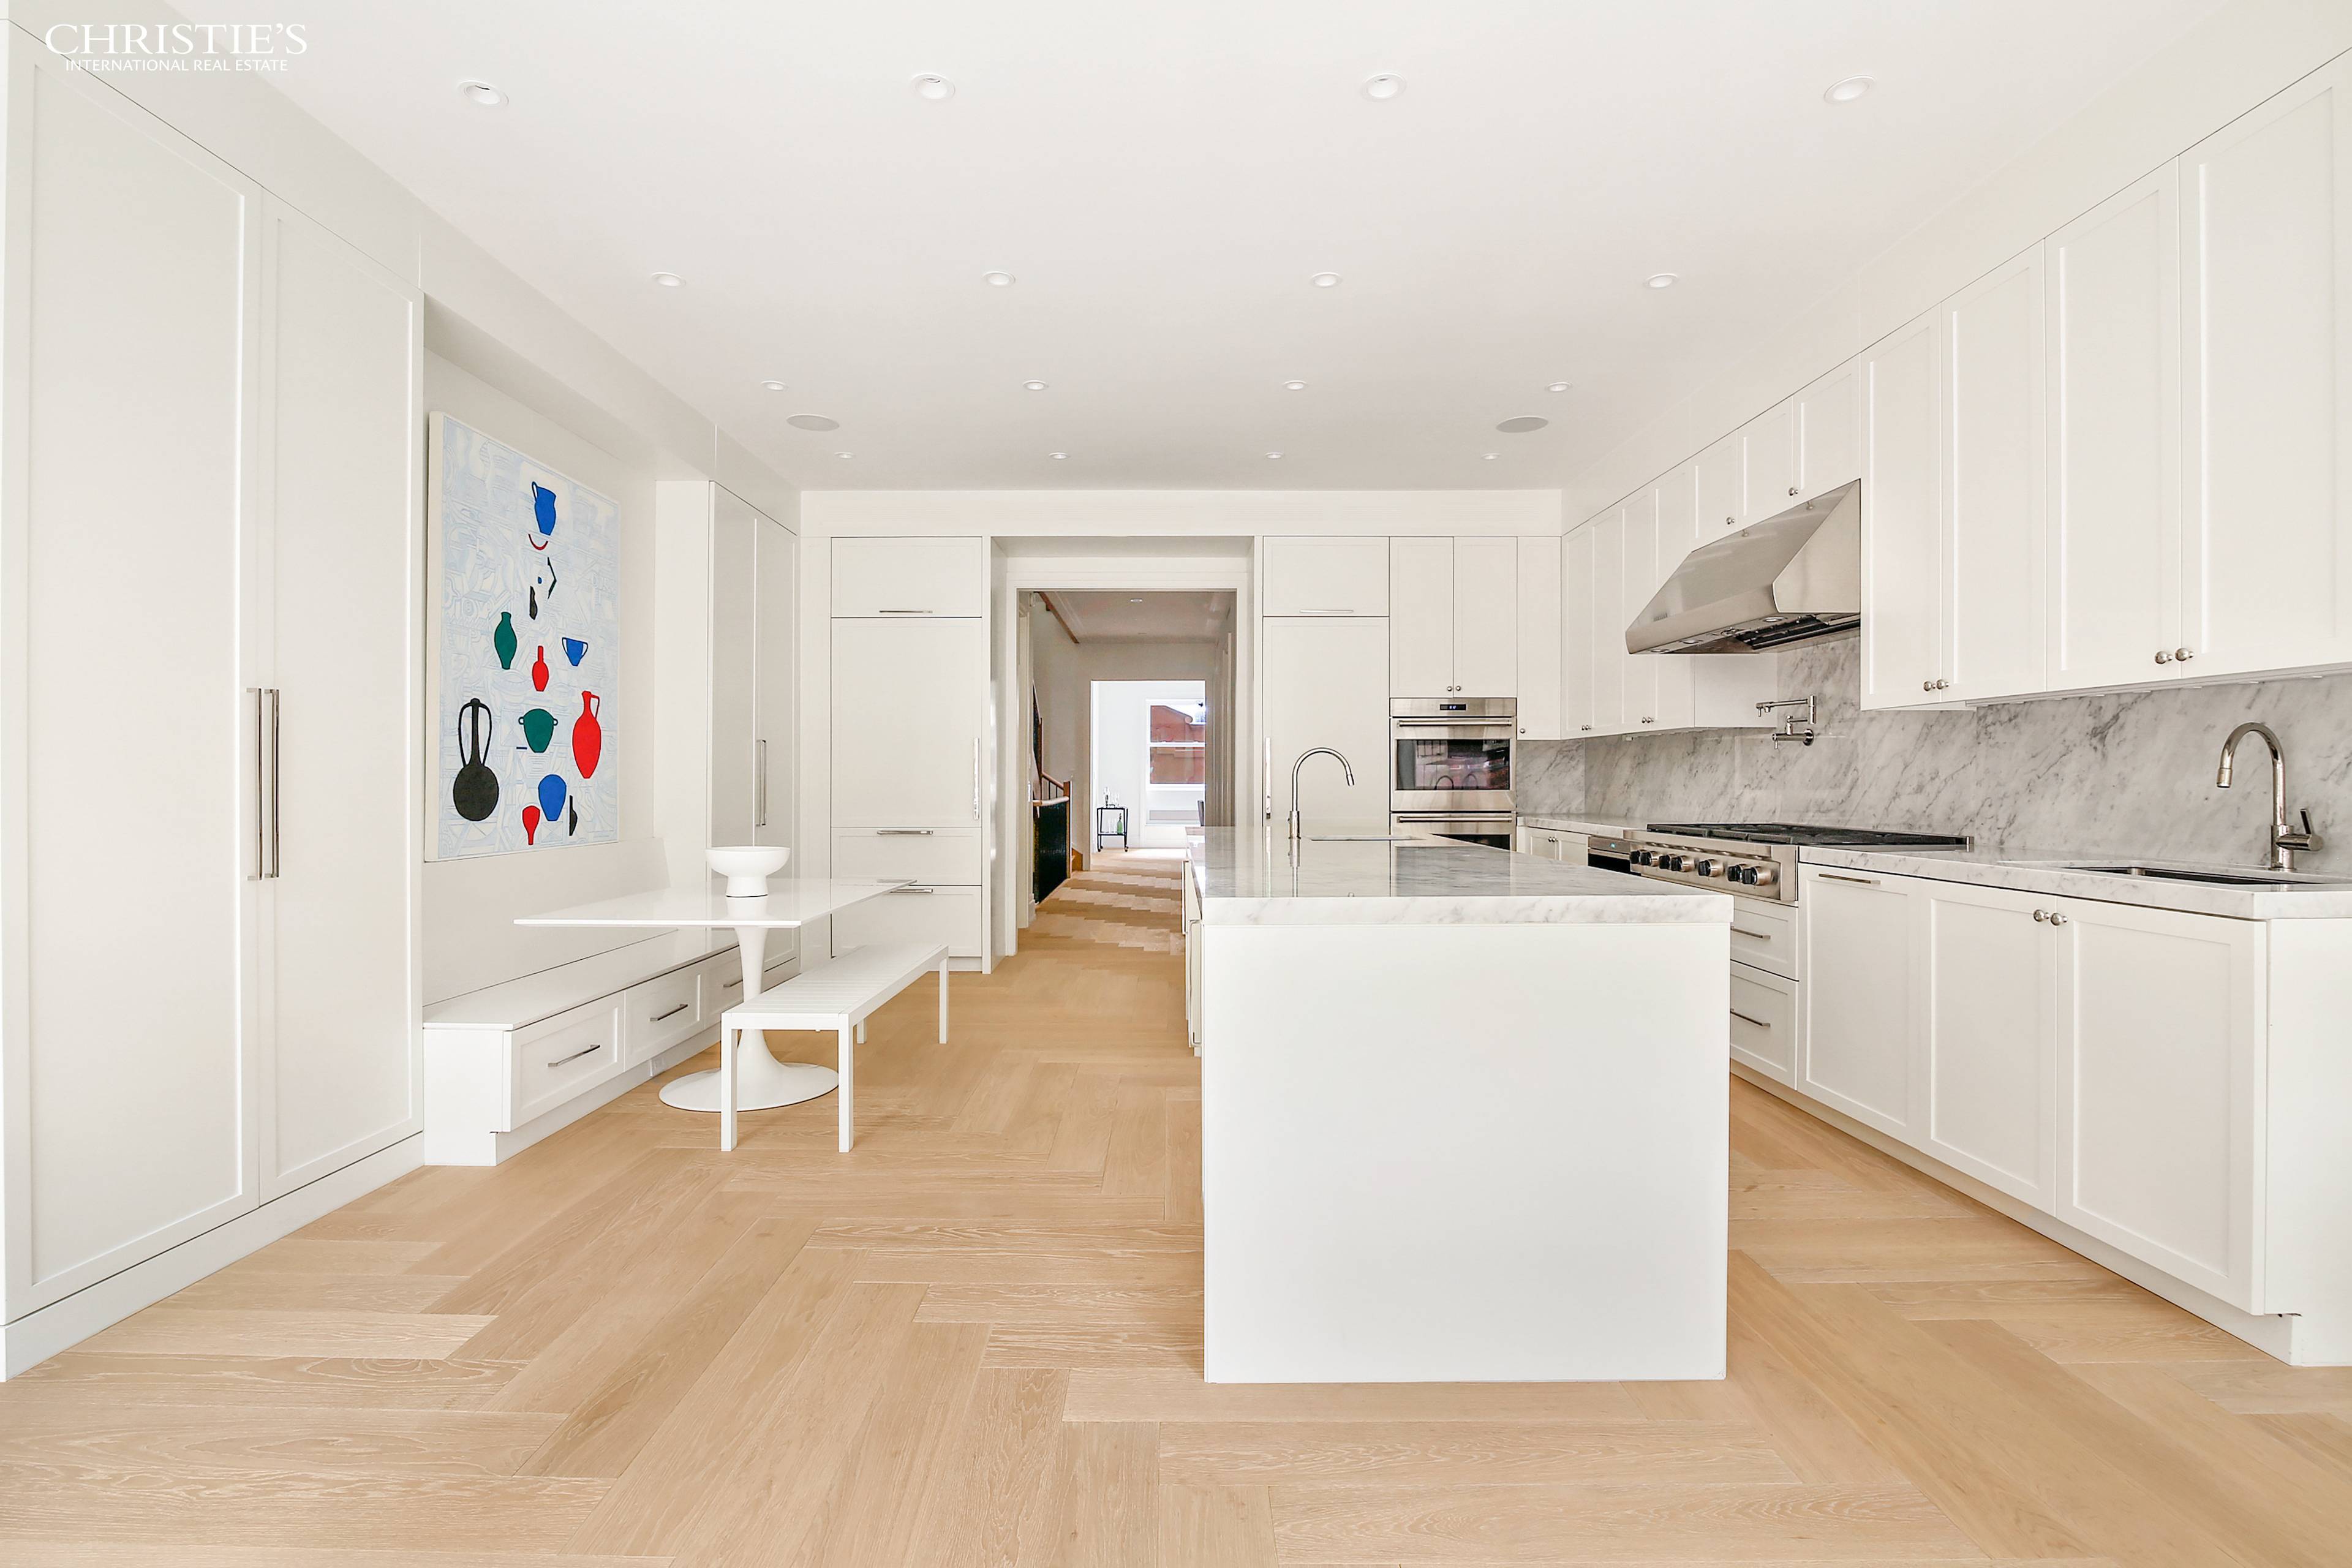 310 West 88th Street is a seven story masterfully renovated Townhouse on an iconic block designed by Architect Rogelio Cambiasso.